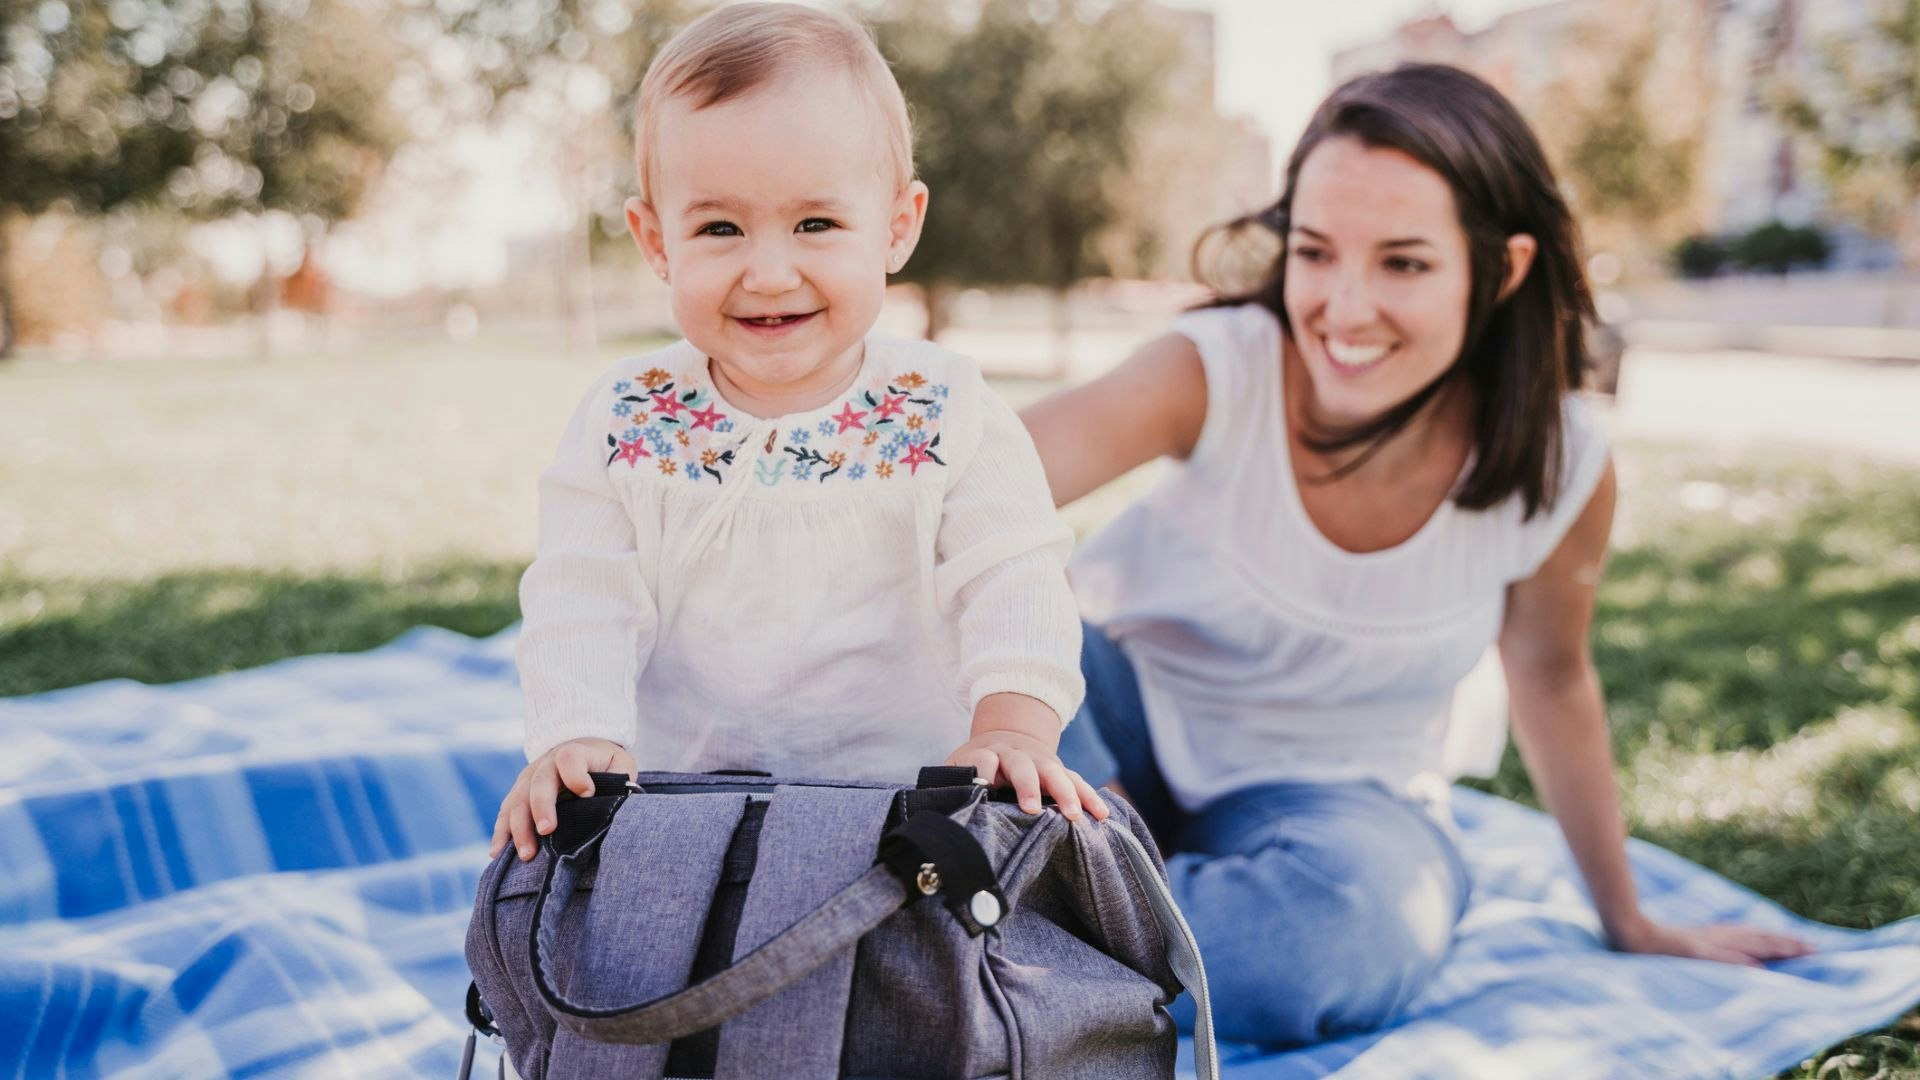 Stylish Diaper Bags 2018 - Real Mother